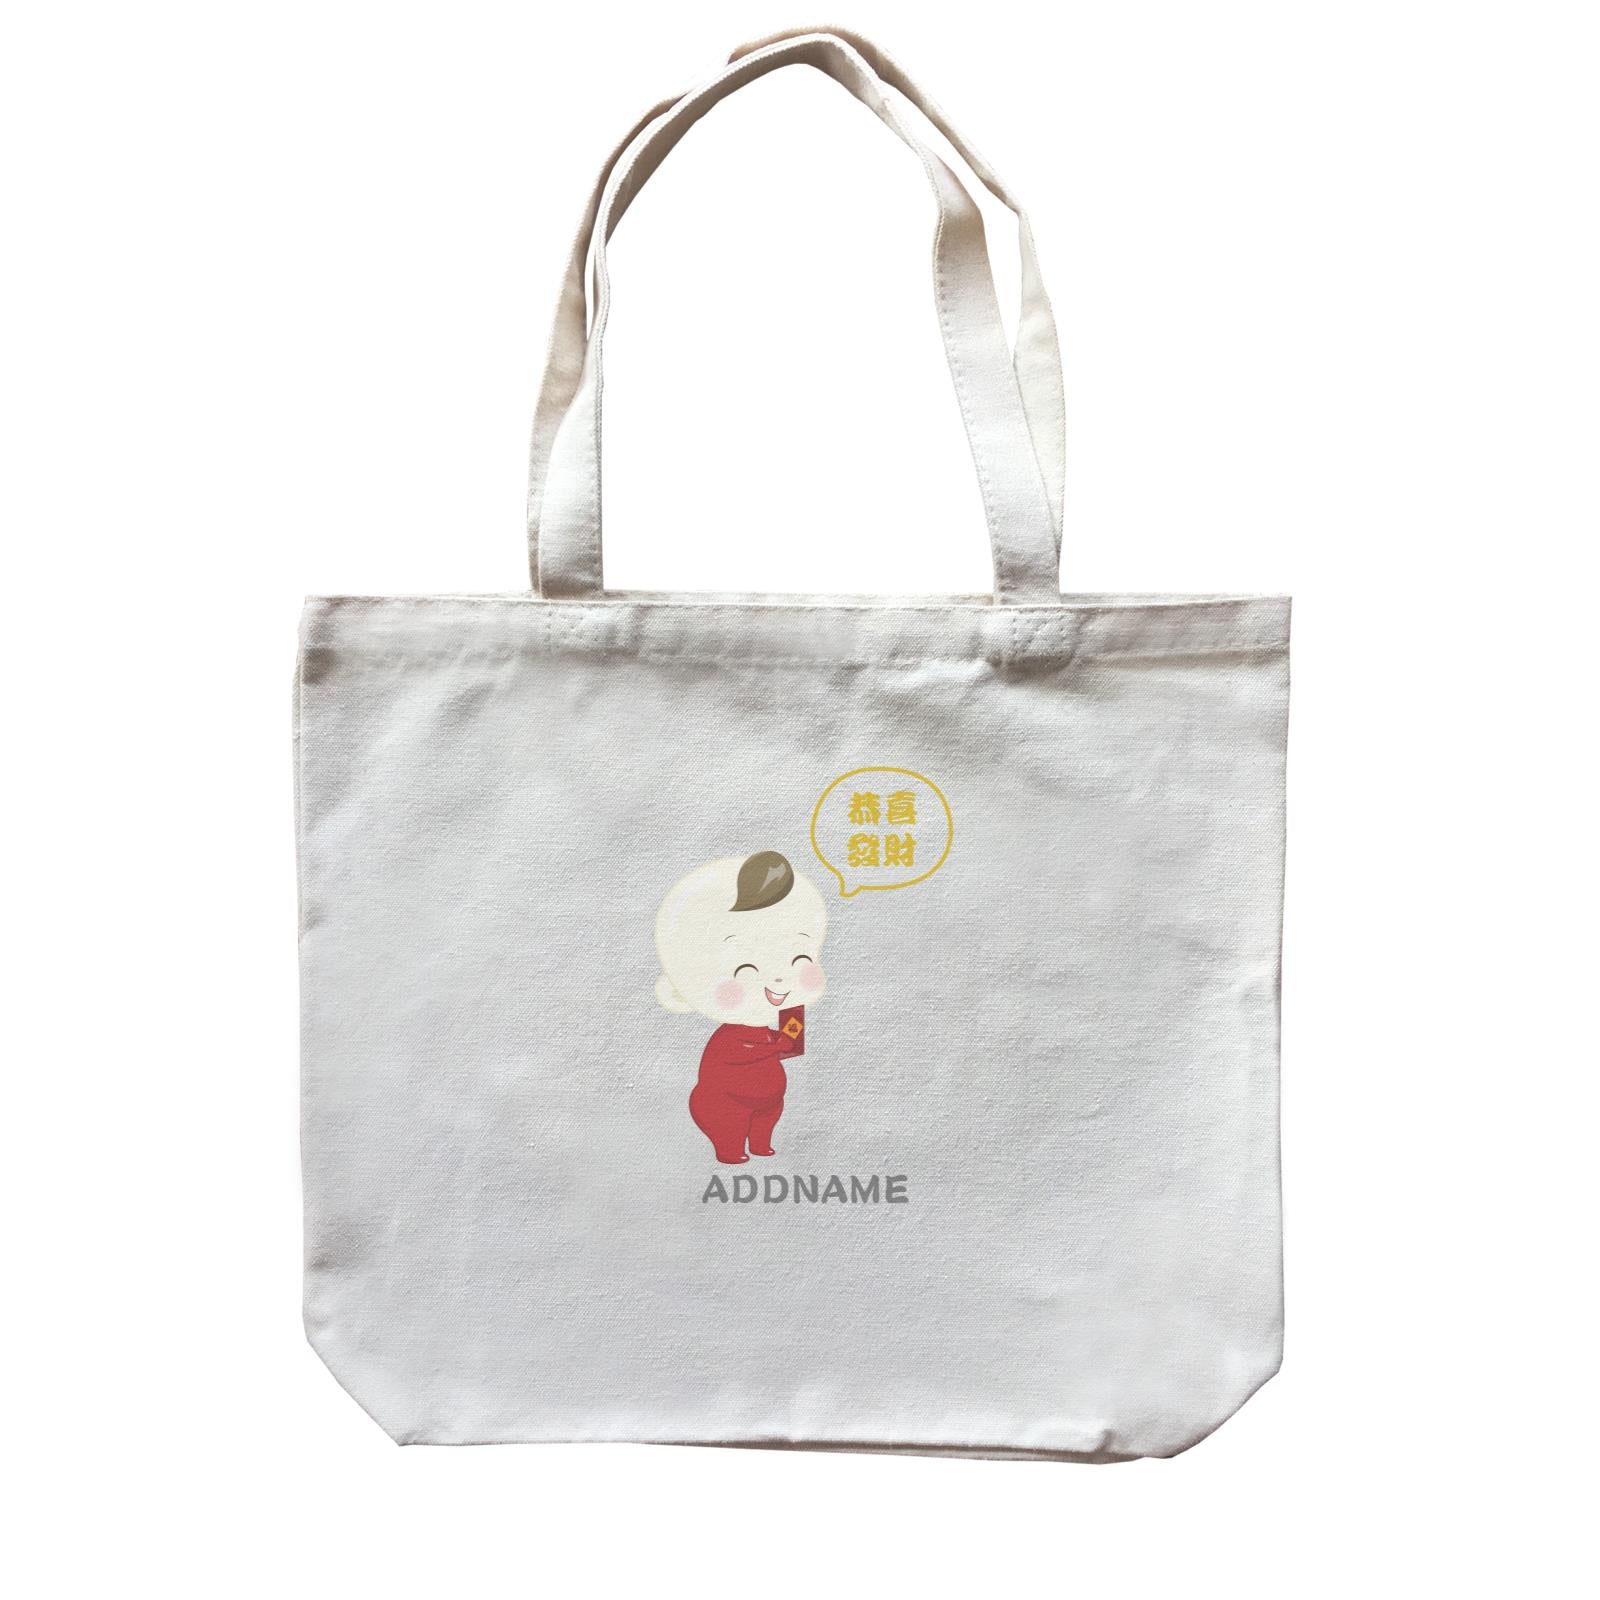 Chinese New Year Family Gong Xi Fai Cai Baby Boy Addname Canvas Bag